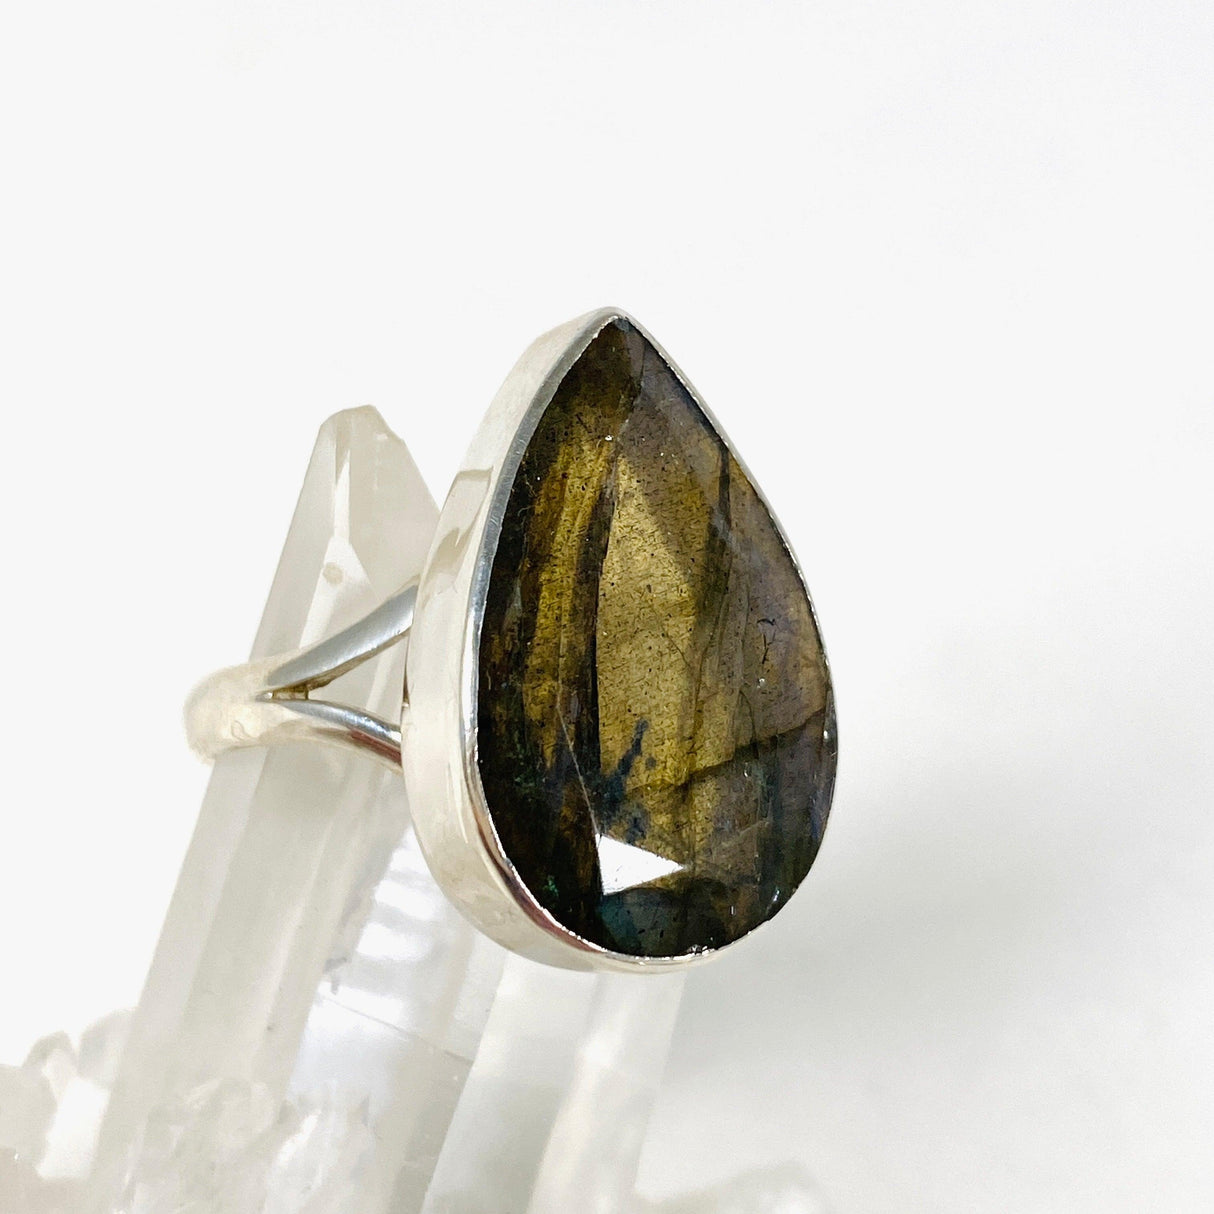  Blue iridescent Labradorite faceted gemstone and silver ring on a clear quartz crystal